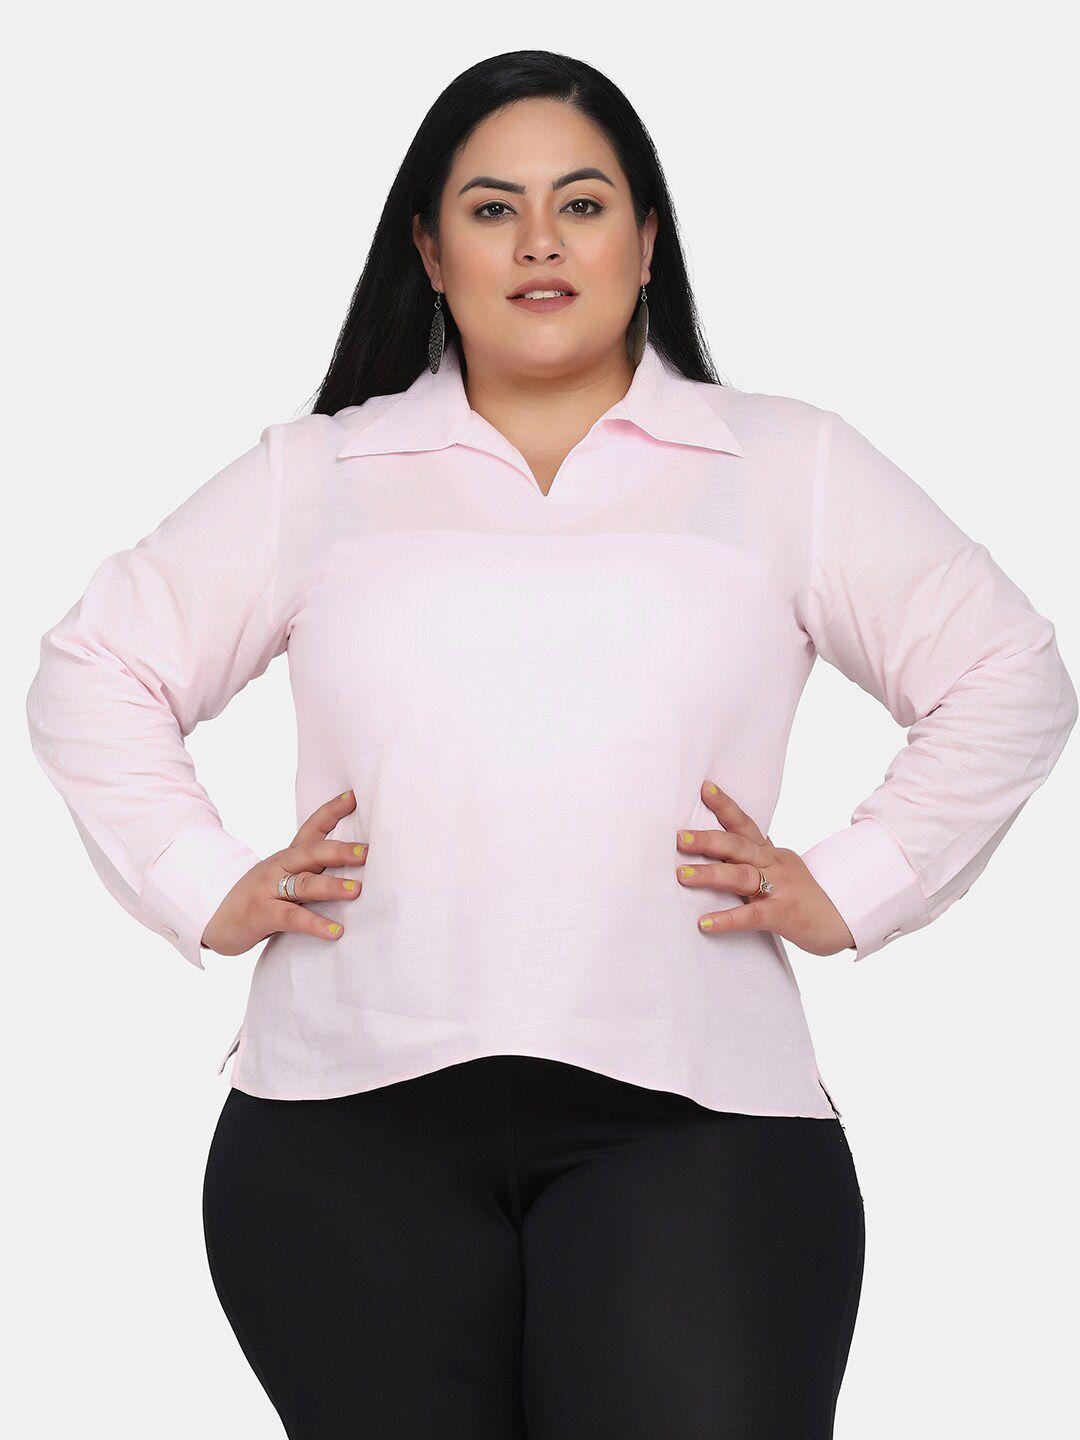 powersutra pink plus size shirt style top